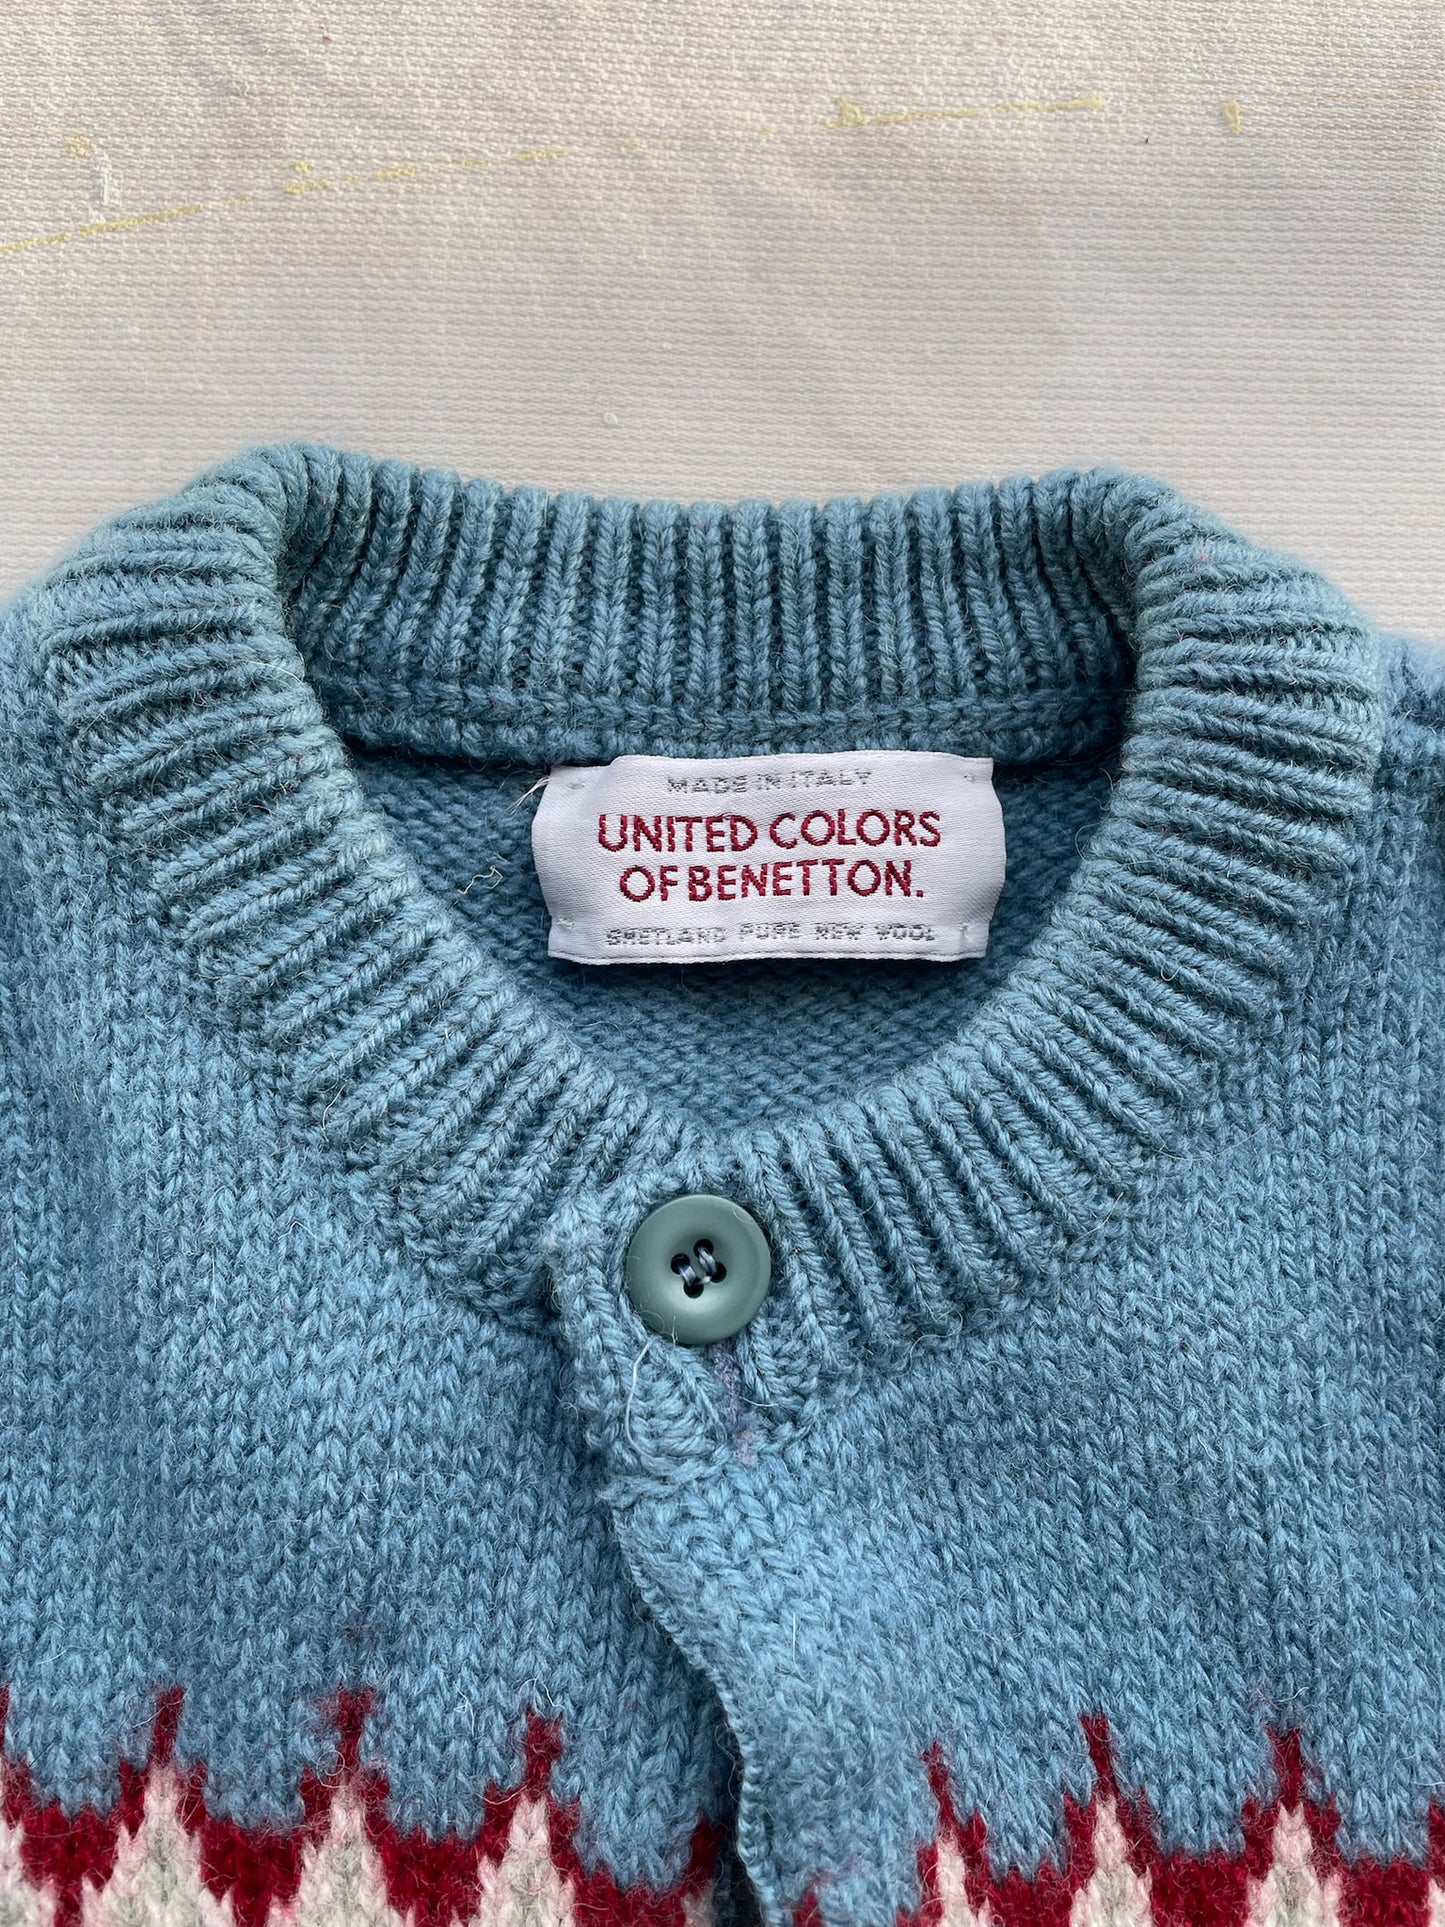 United Colors of Benetton Cardigan Sweater—[XS/S]